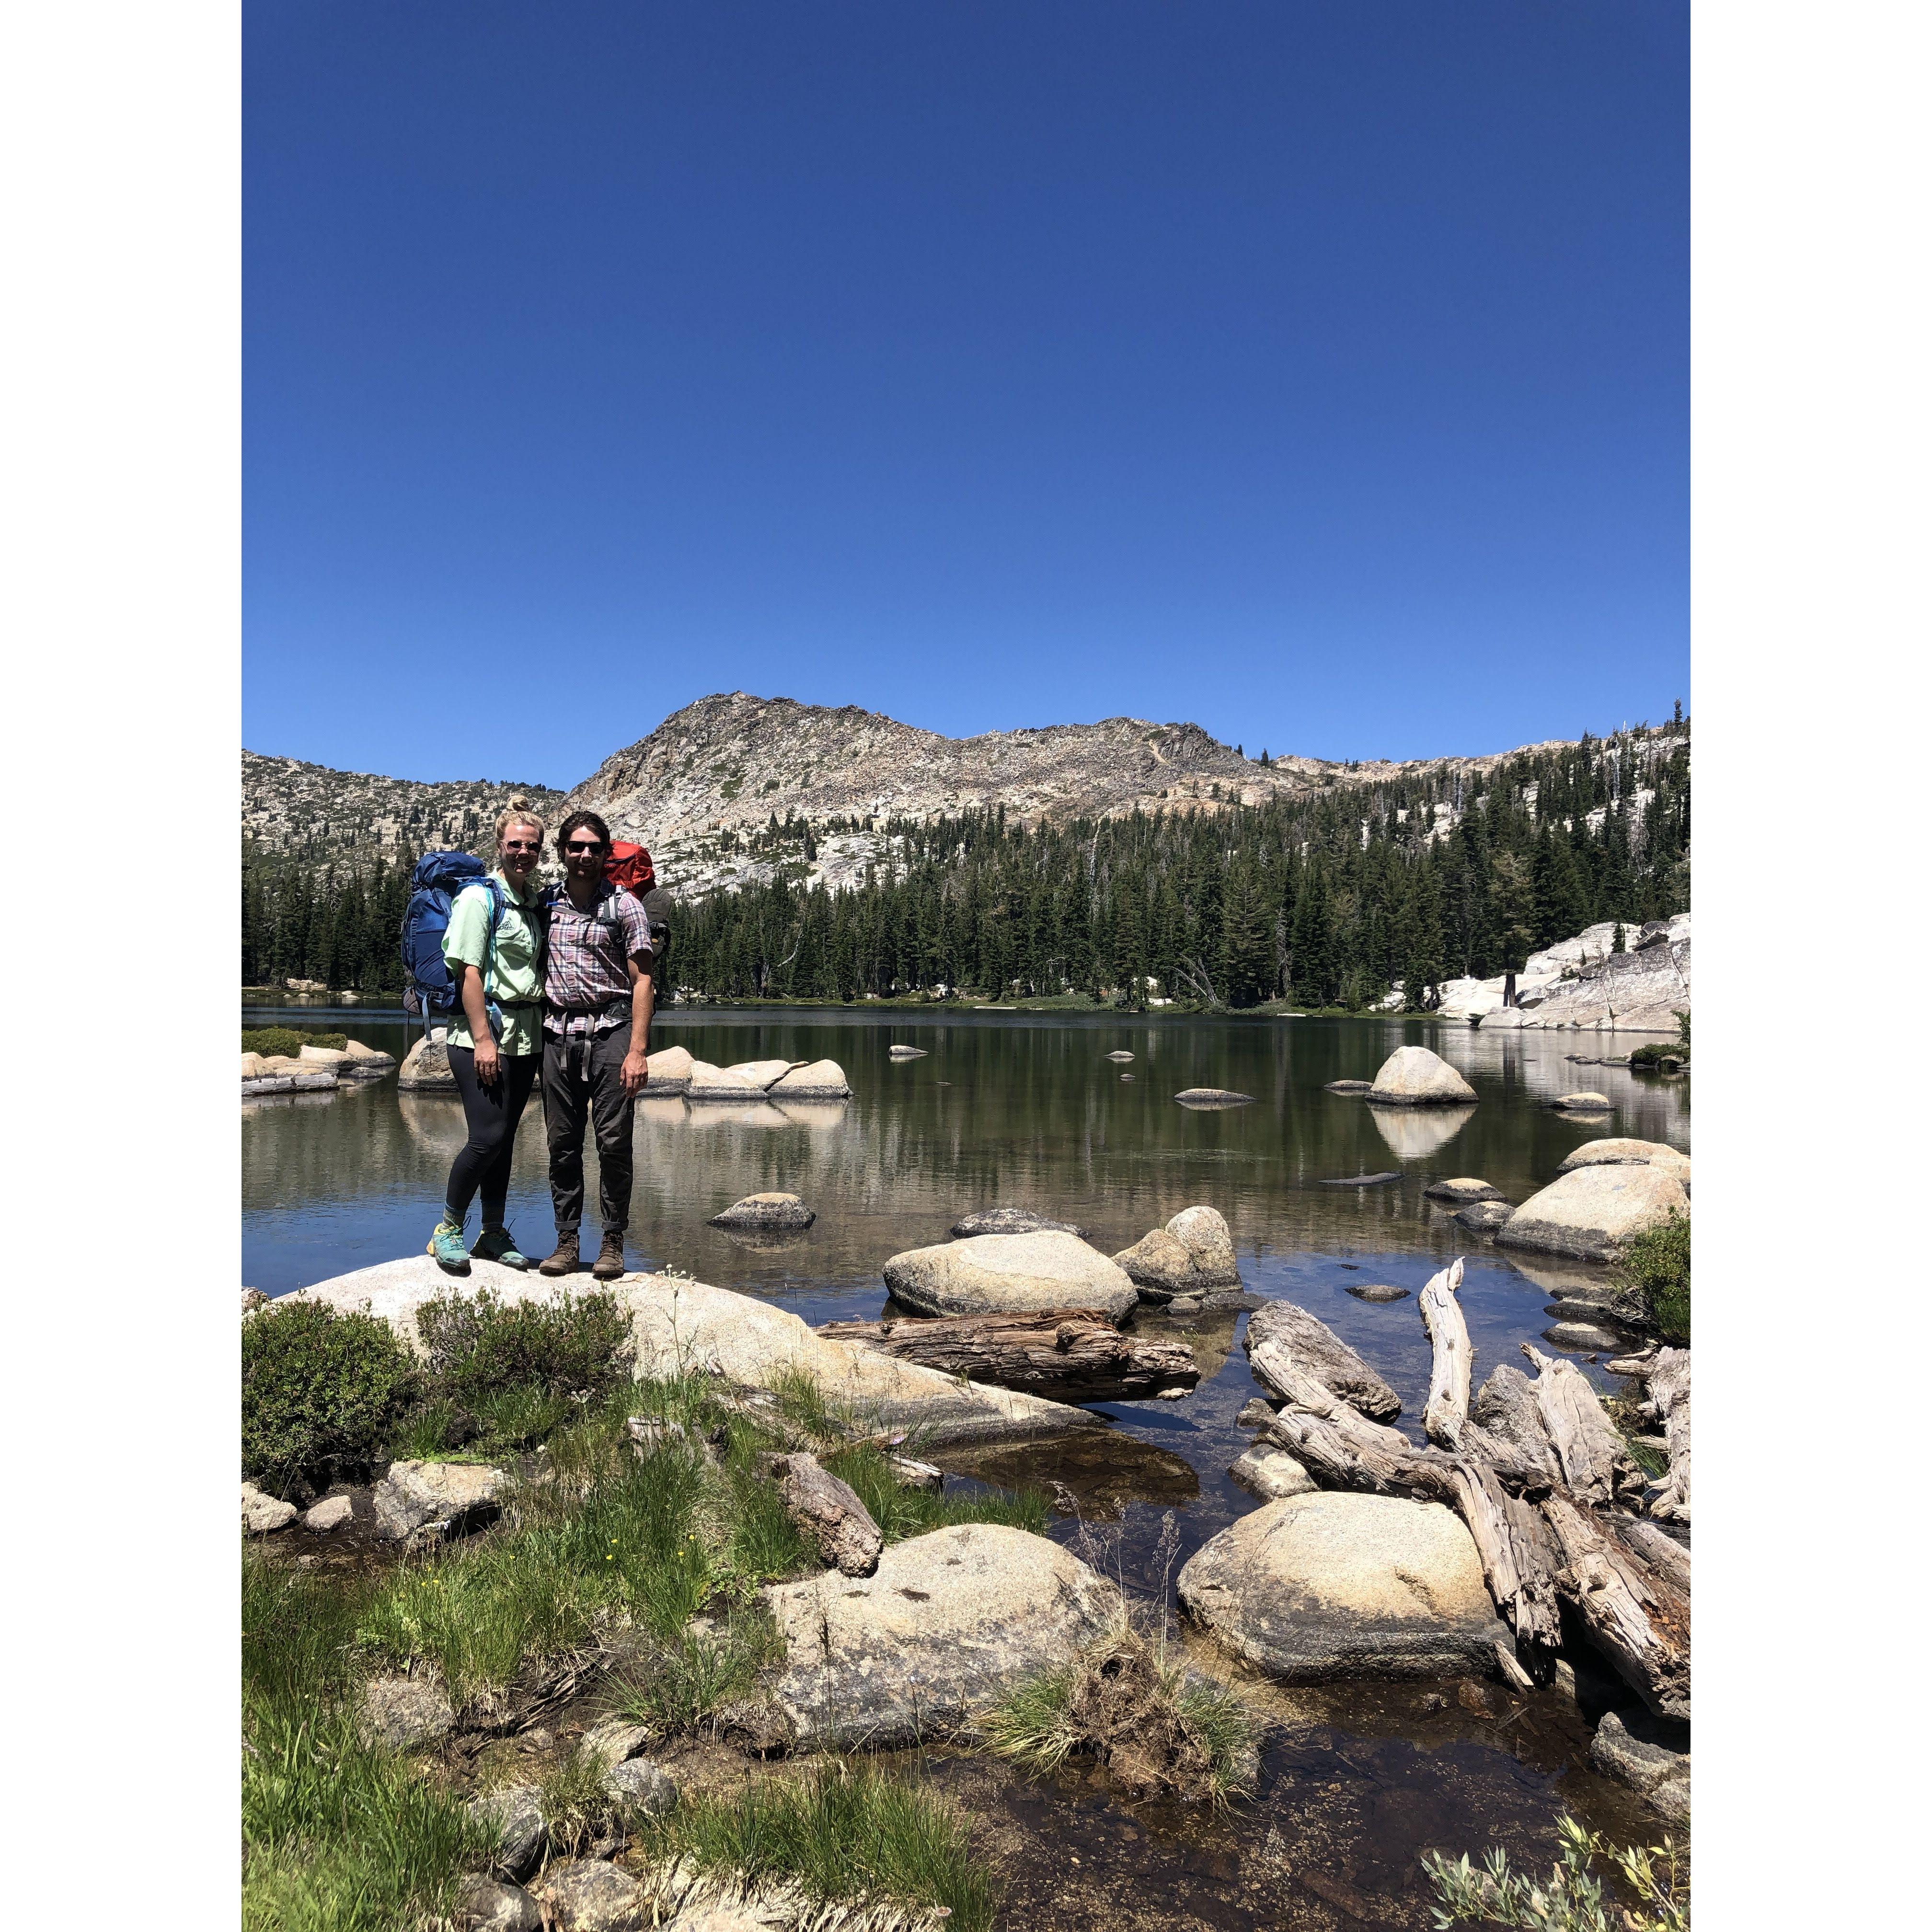 Backpacking trip in Desolation Wilderness, Aug. 2020.